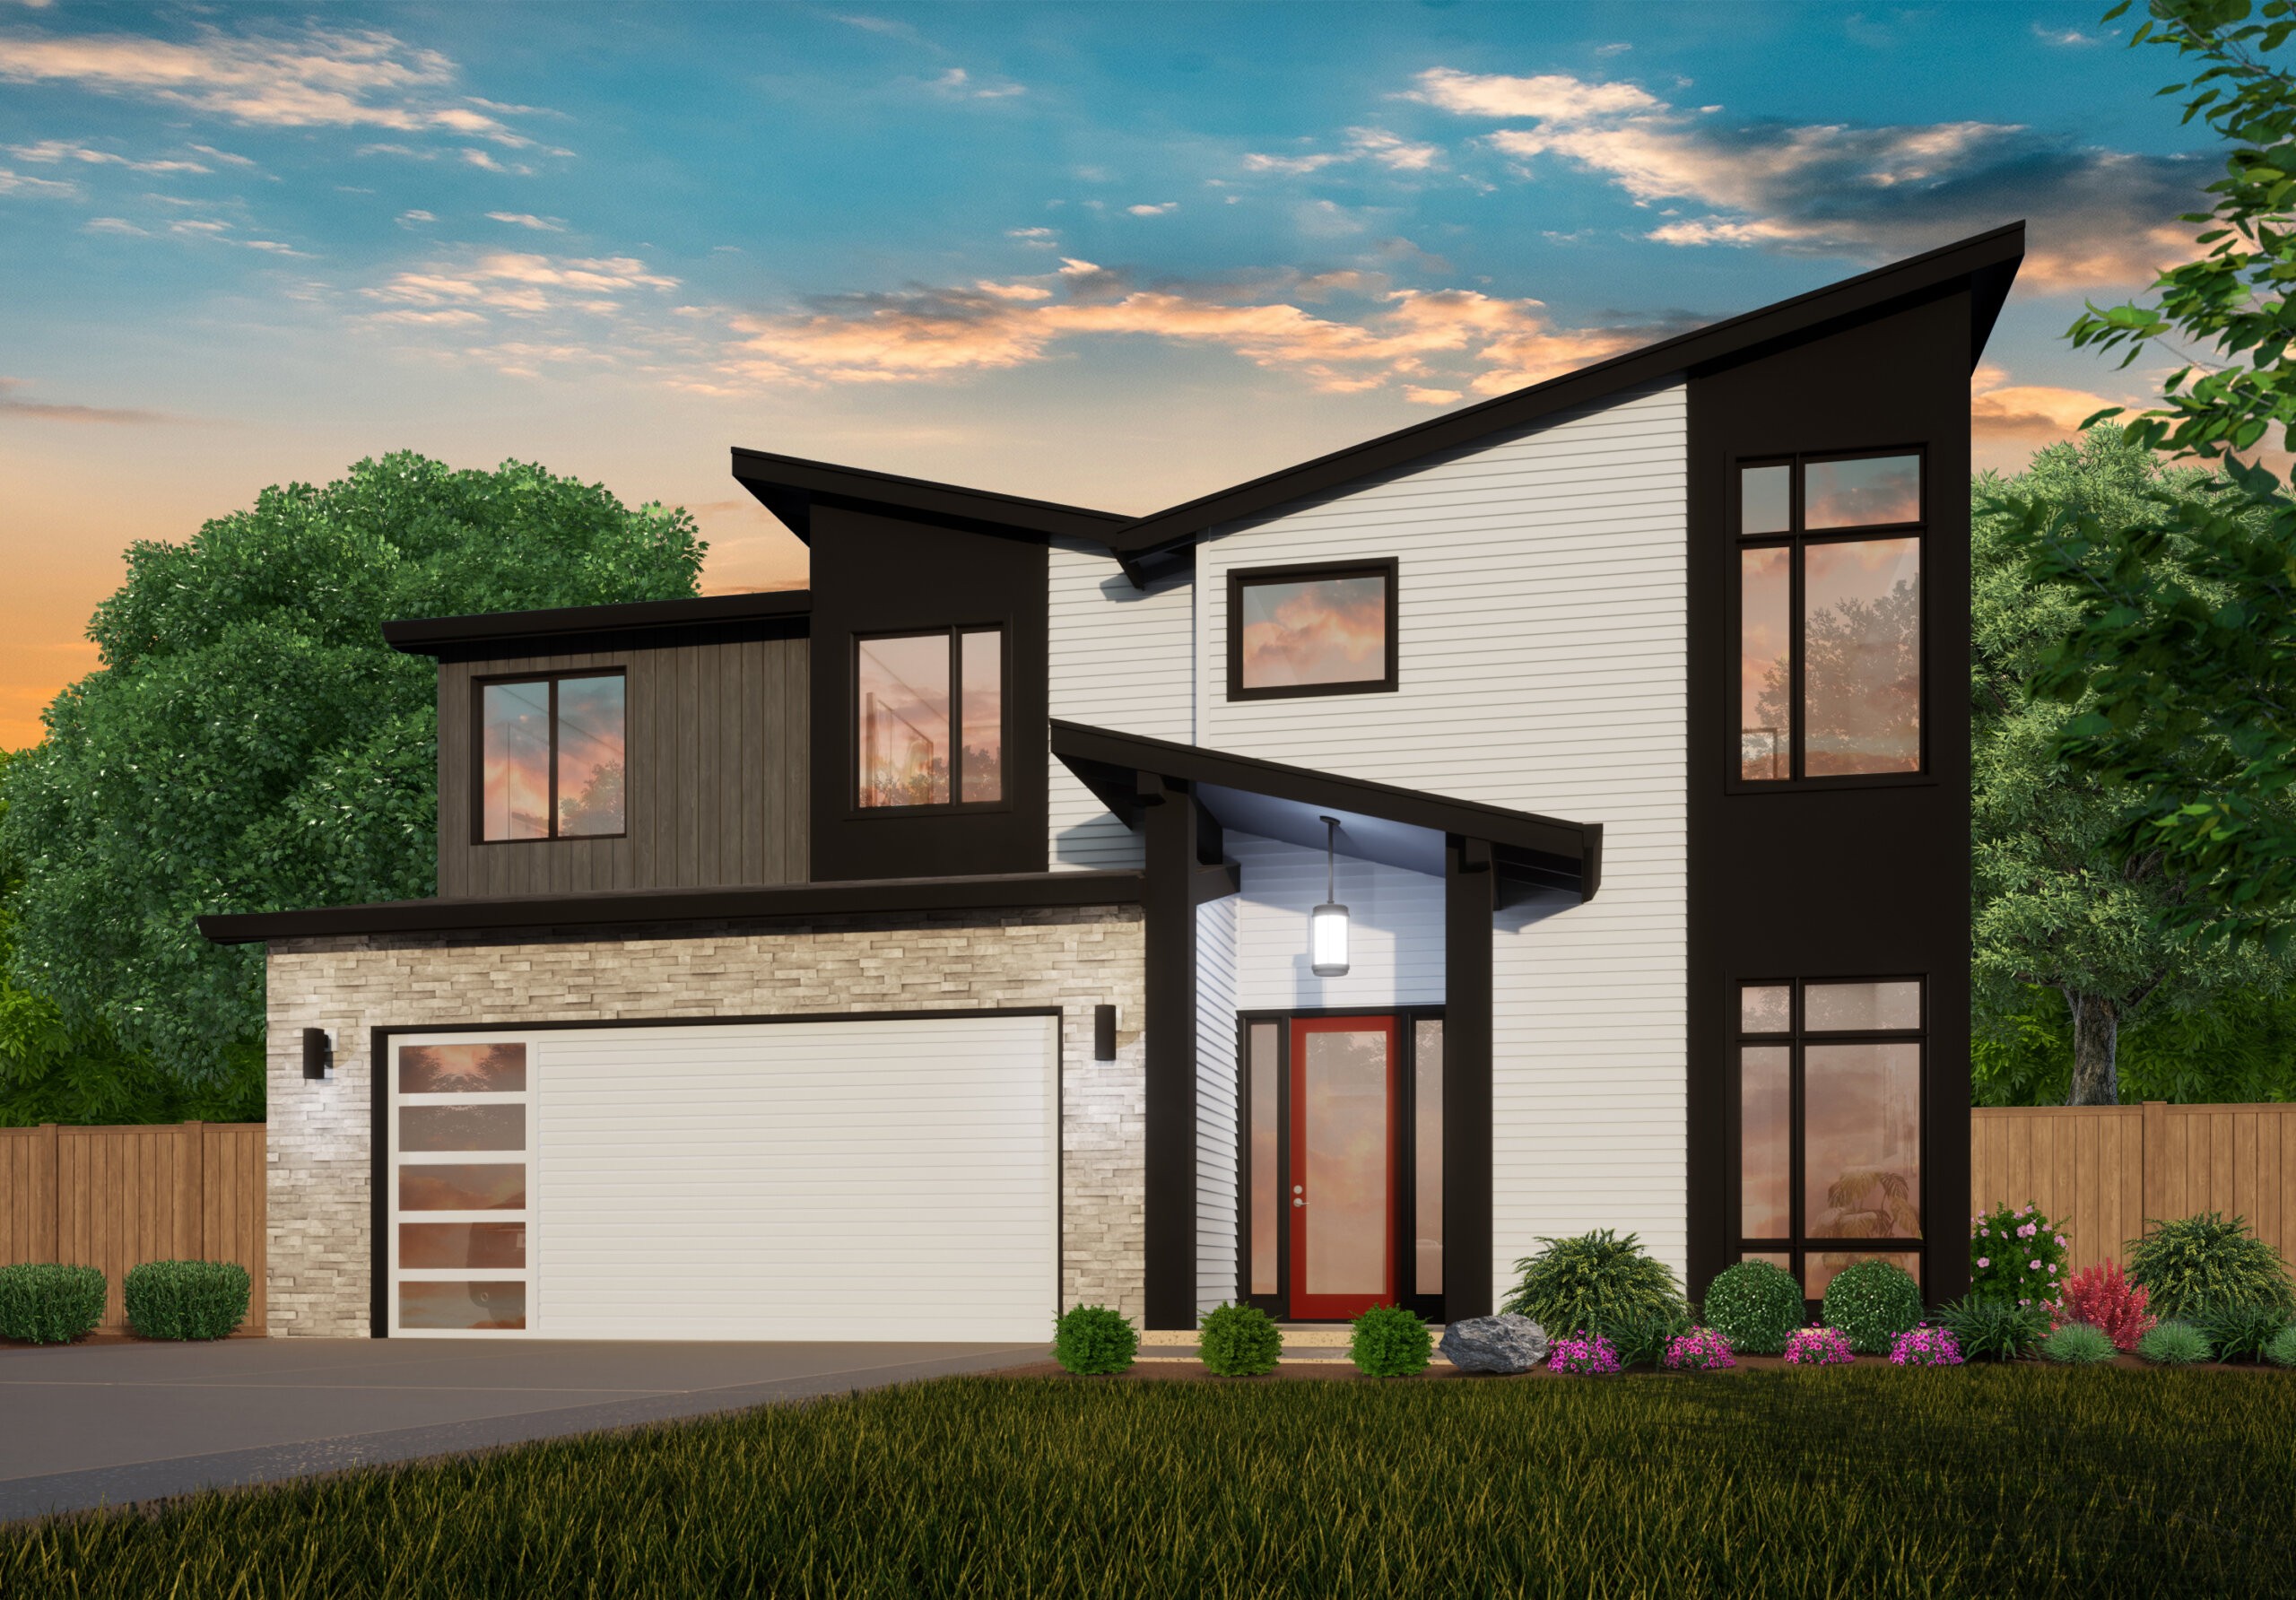 https://markstewart.com/wp-content/uploads/2022/06/MODERN-TWO-STORY-HOUSE-PLAN-MM-3298-SUNSET-8-FRONT-VIEW-scaled.jpg